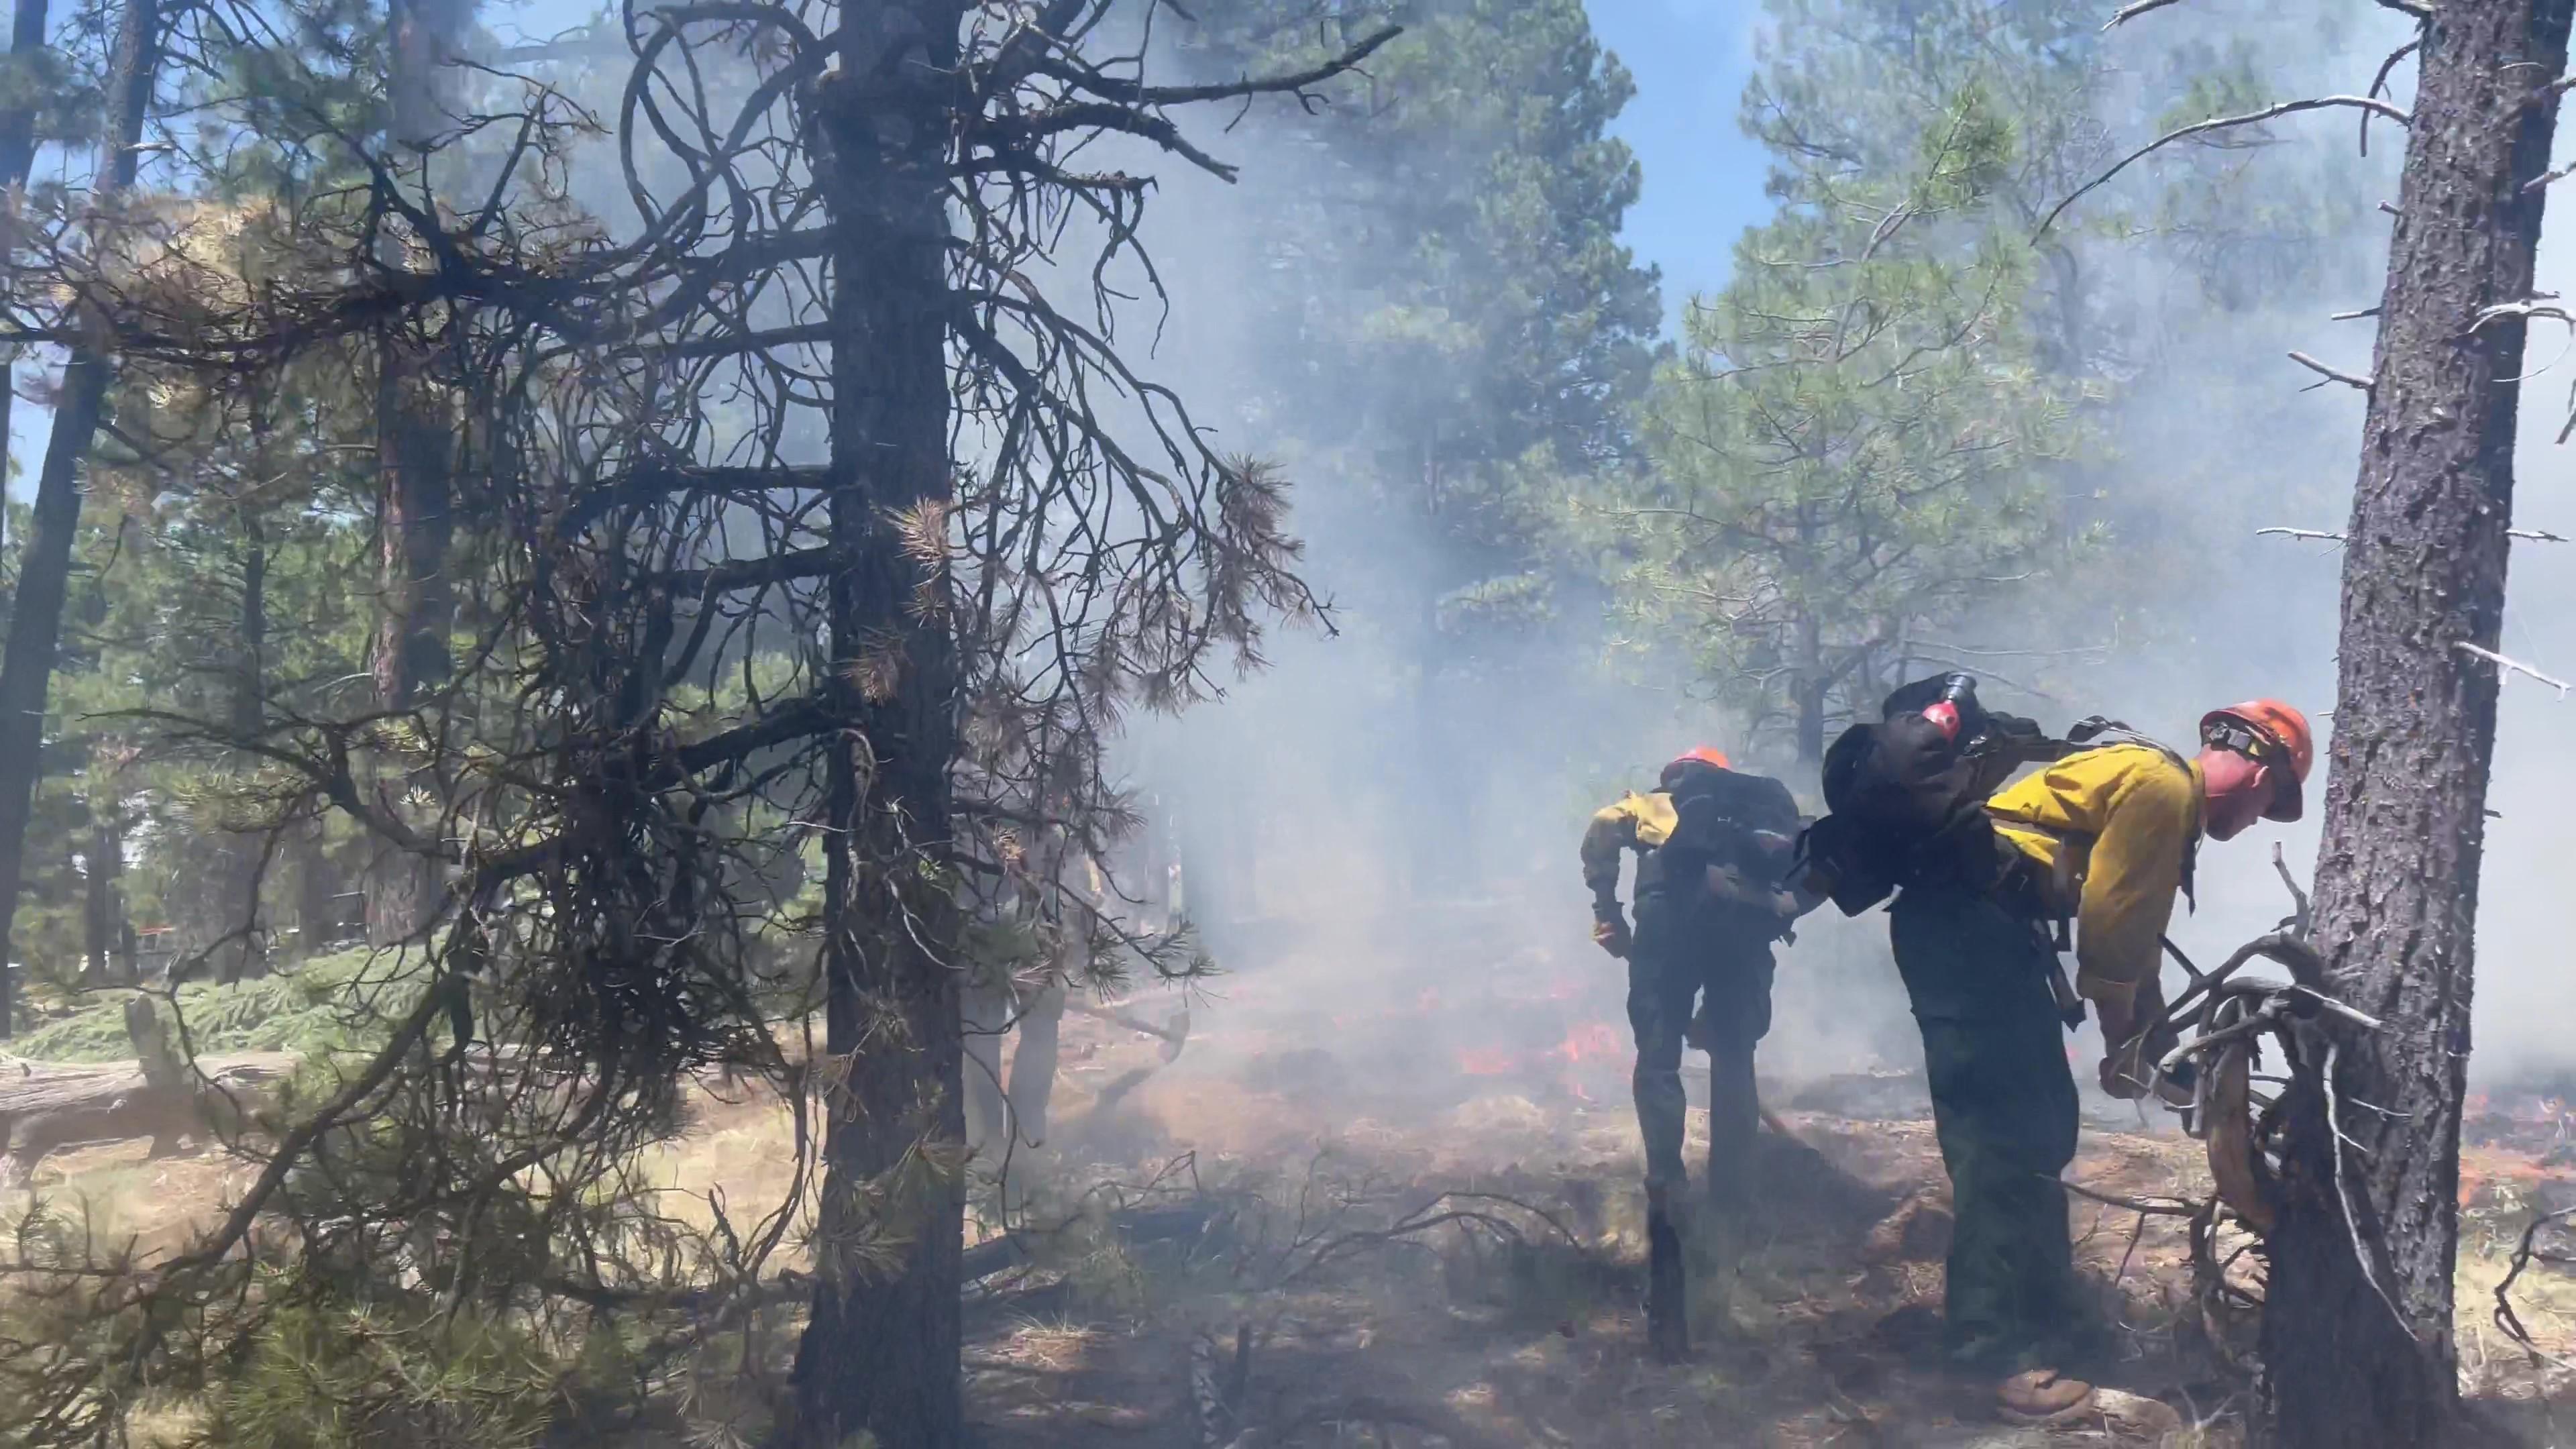 The Tujunga Hotshots dig fireline to stop the spread of the  Pipeline Fire on June 12. Photo by Tujunga Hotshots 